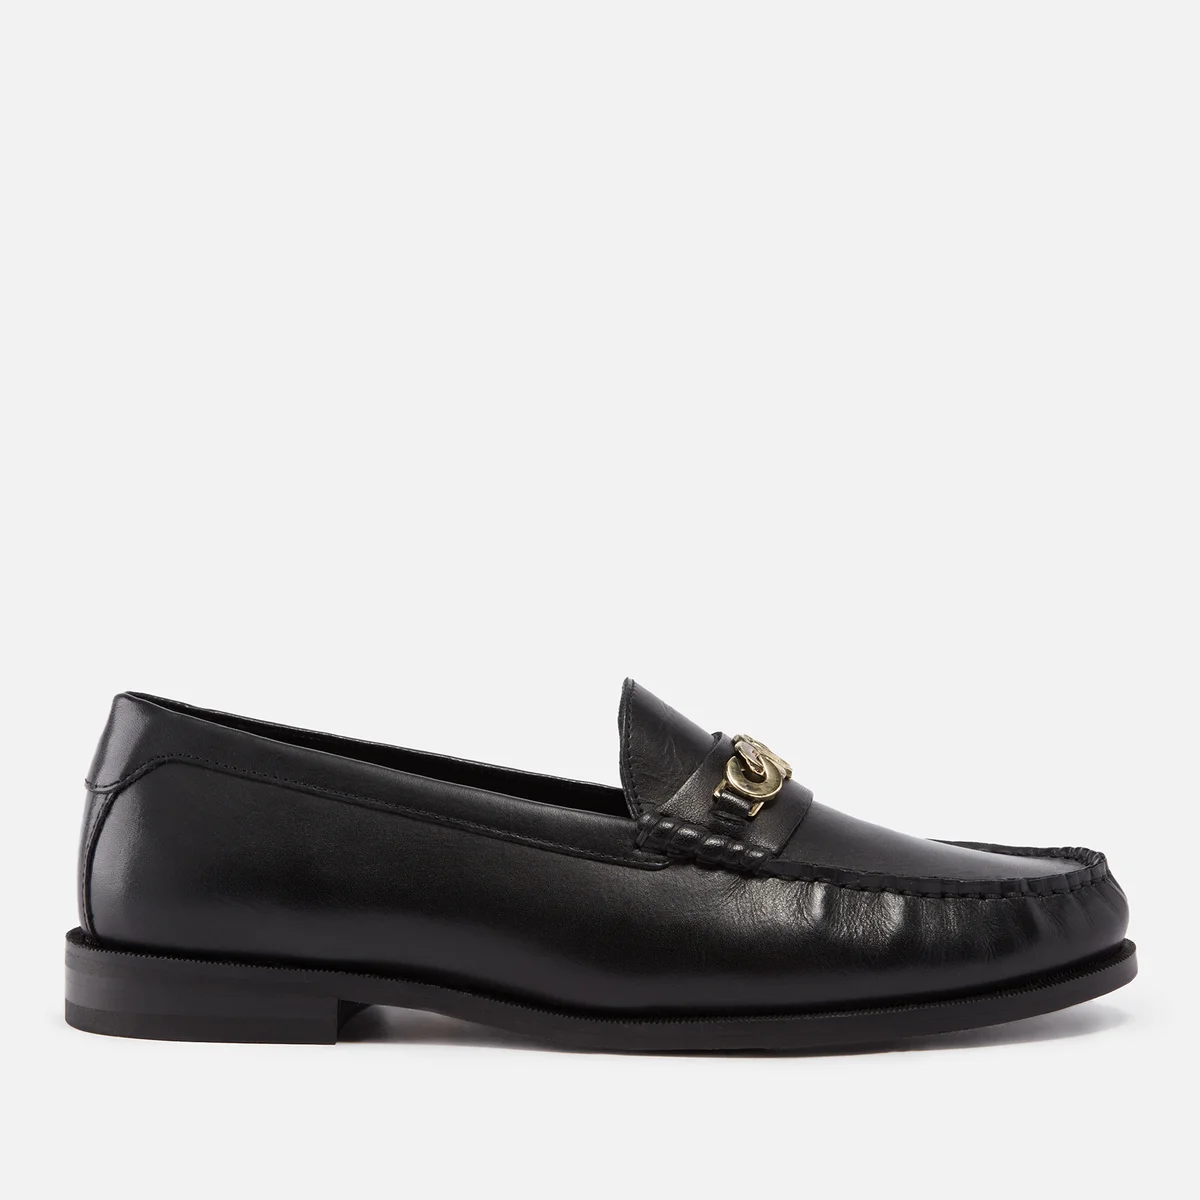 Walk London Riva Sovereign Leather Loafers Image 1